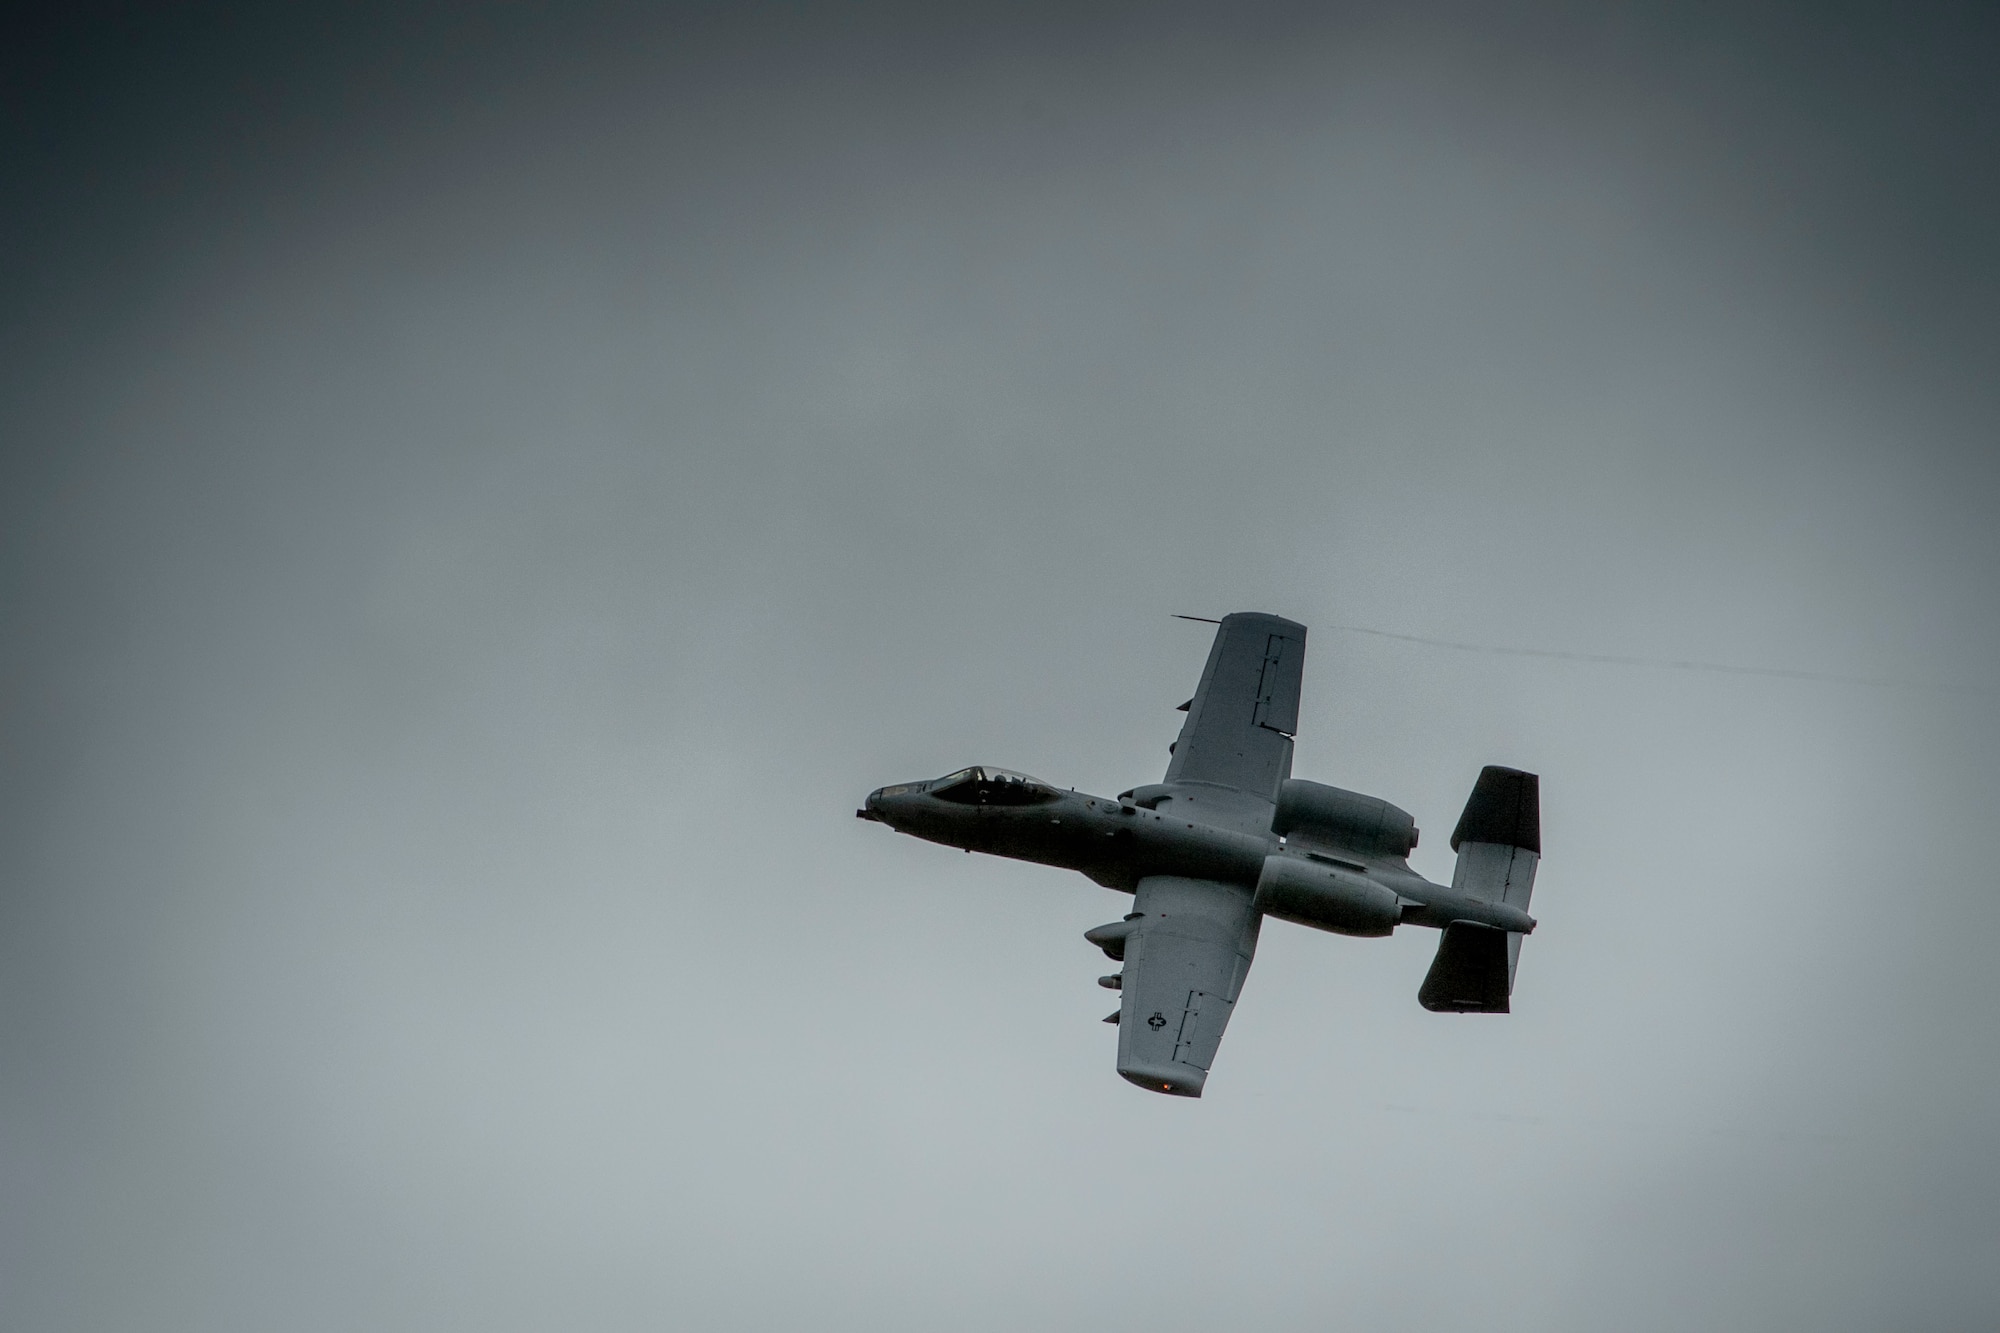 An A-10 Thunderbolt II aircraft assigned to the 107th Fighter Squadron